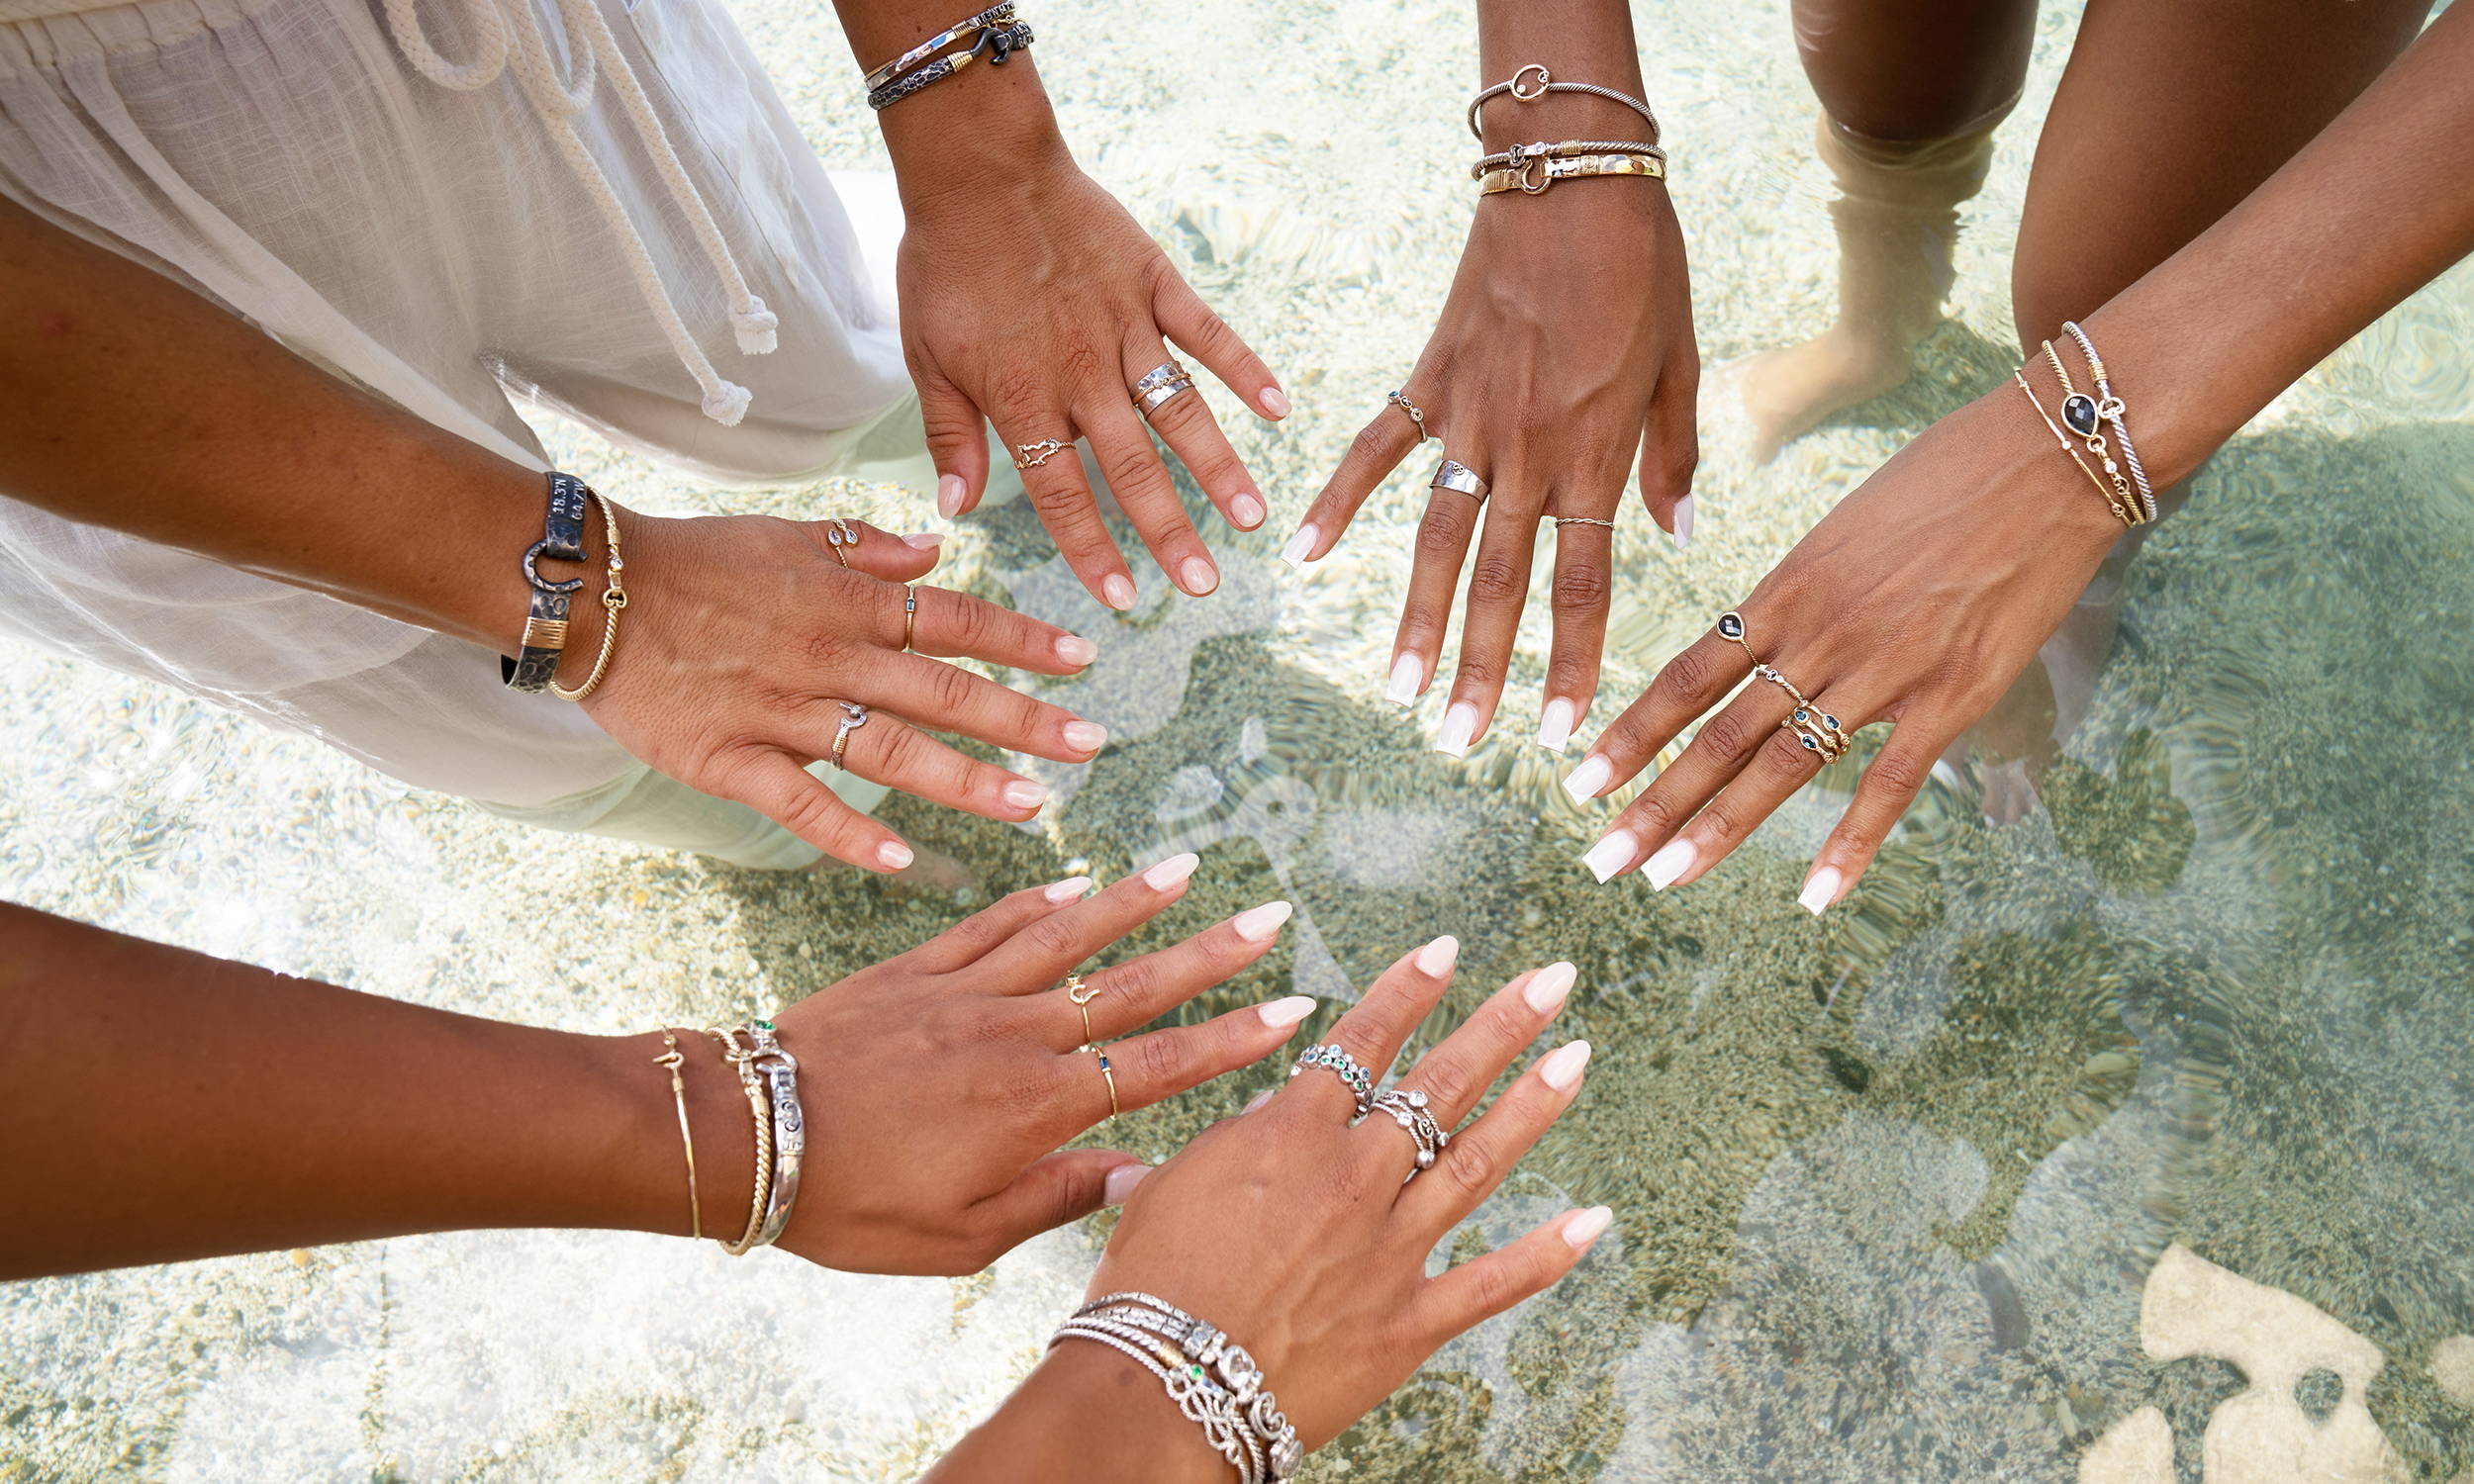 Three peoples hands put together over a the ocean showing off their Vibe Jewelry.